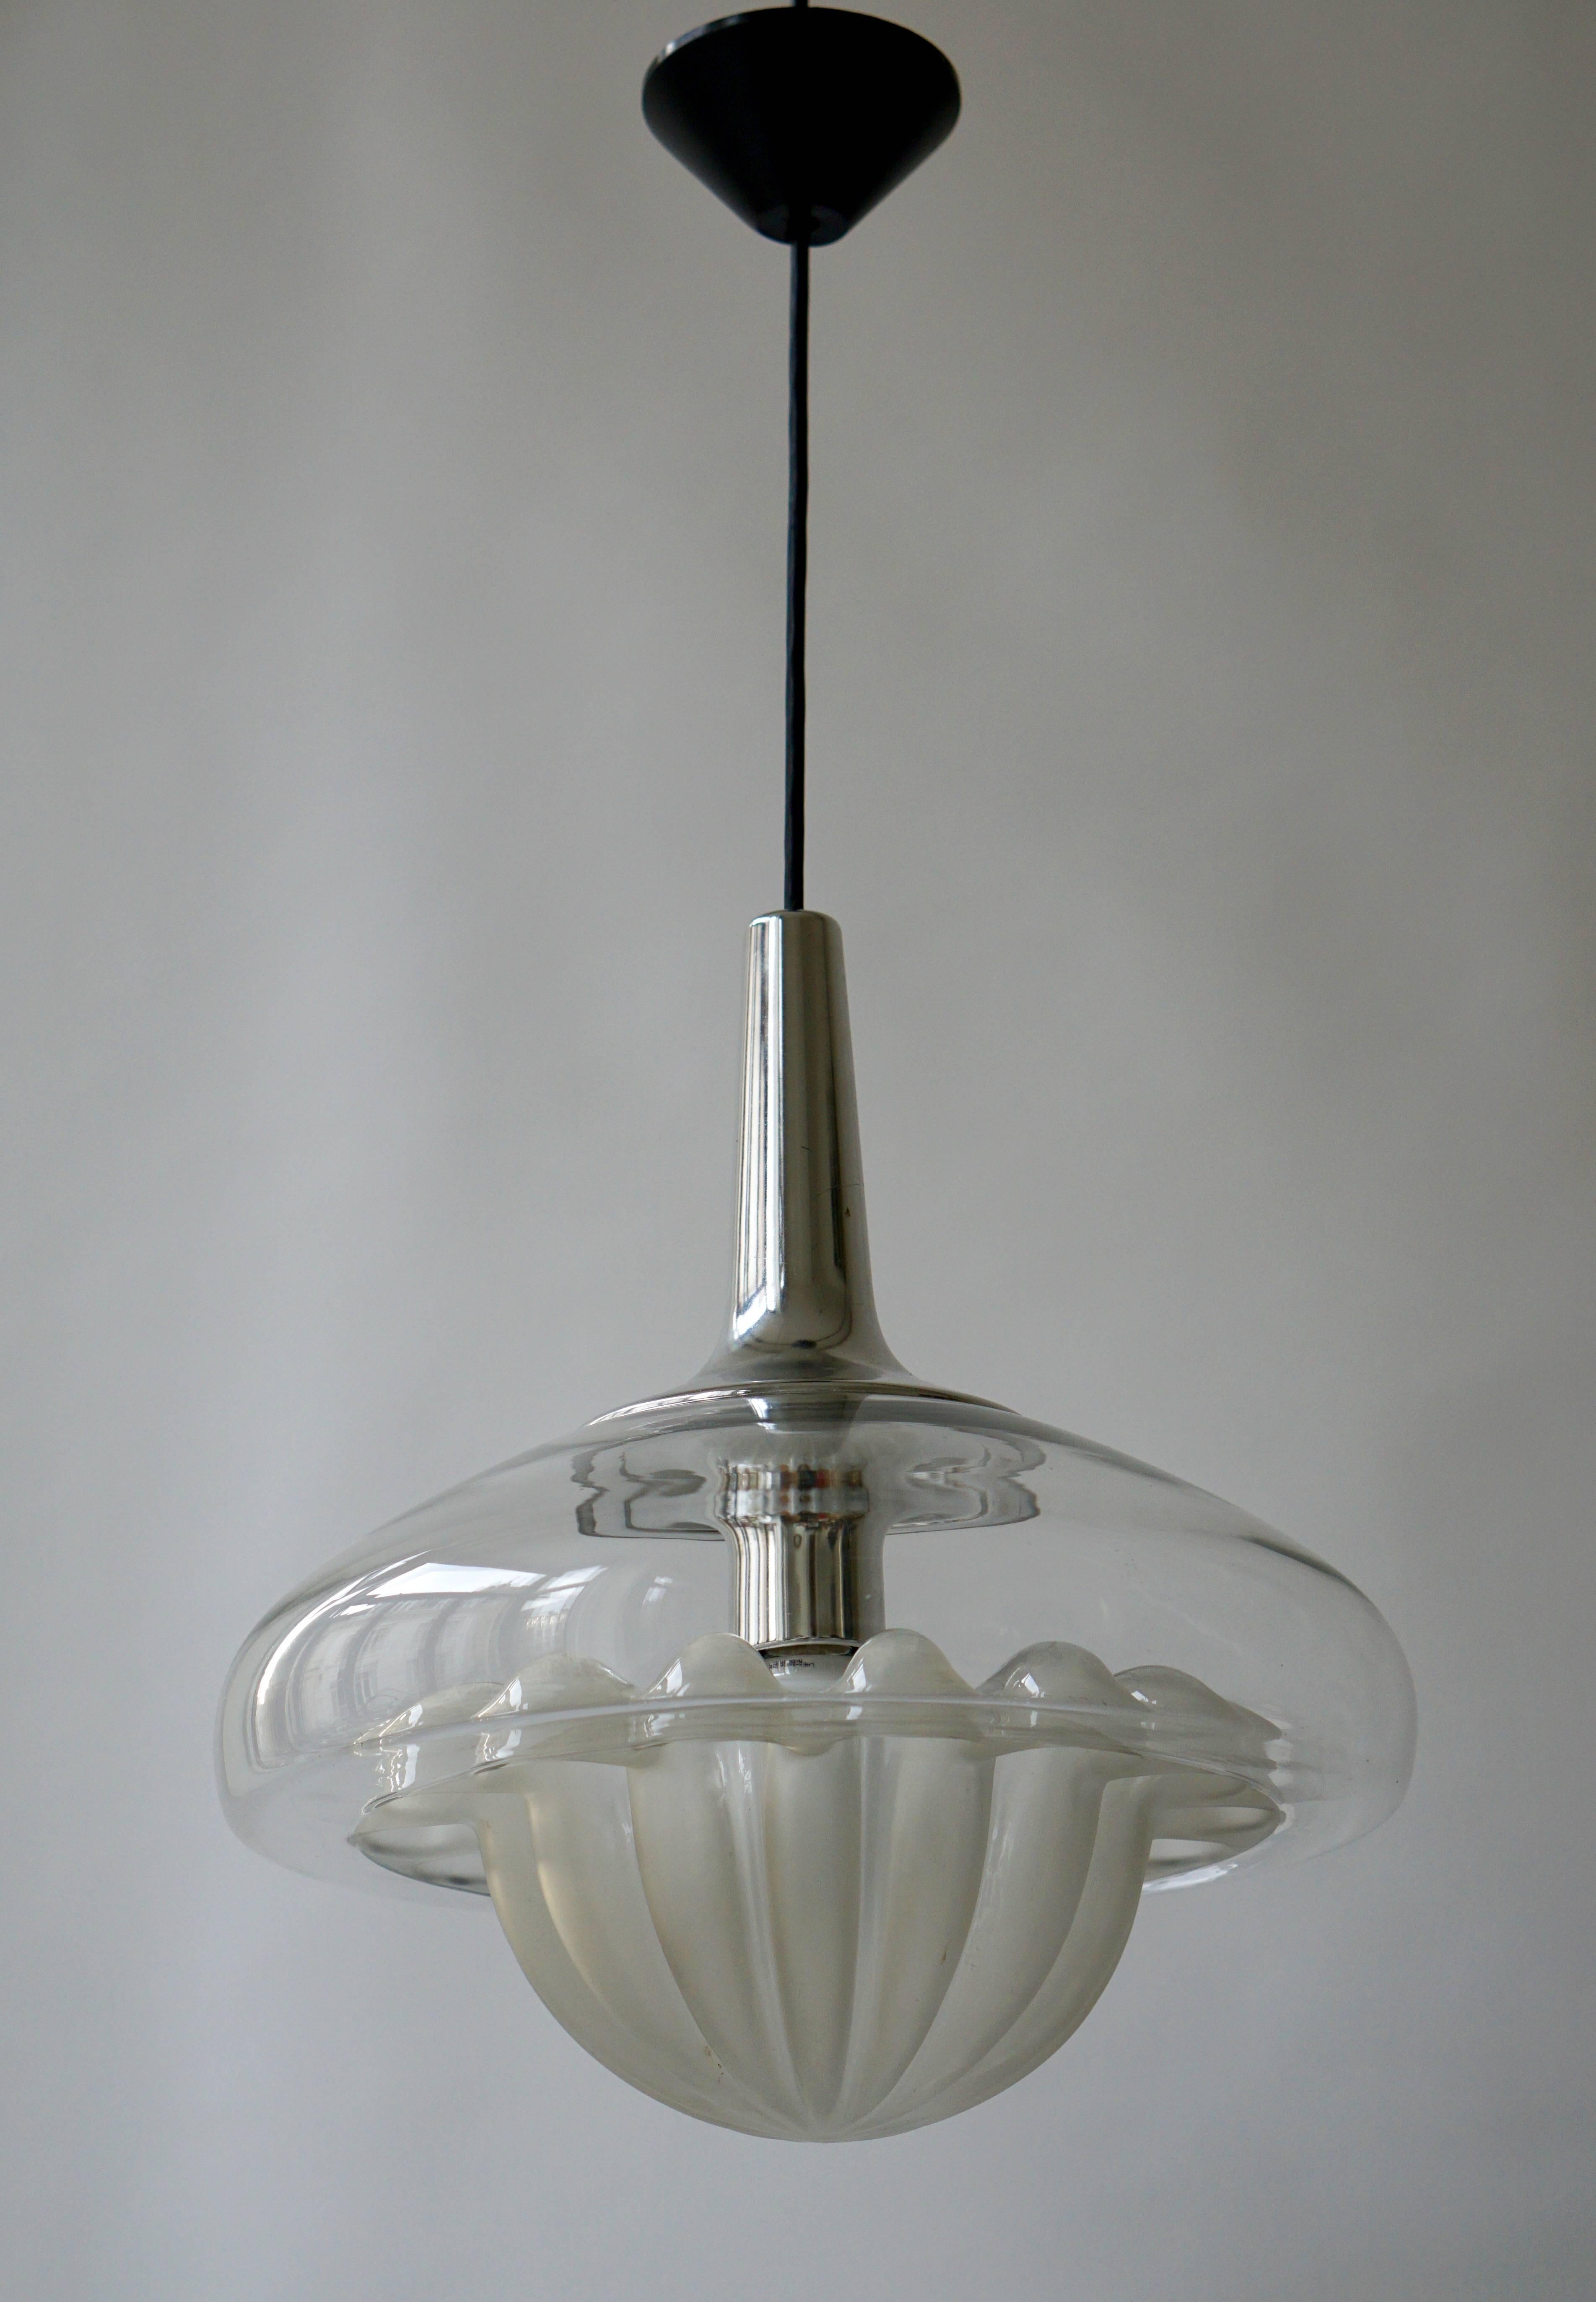 Italian Murano glass pendant light.

The height of only the glass is 8.26 inch( 21 cm).
The height of the glass and chromed funnel is 16.14 inch( 41 cm).
The total height with electric wire and canope is  35.43 inch (90 cm).
